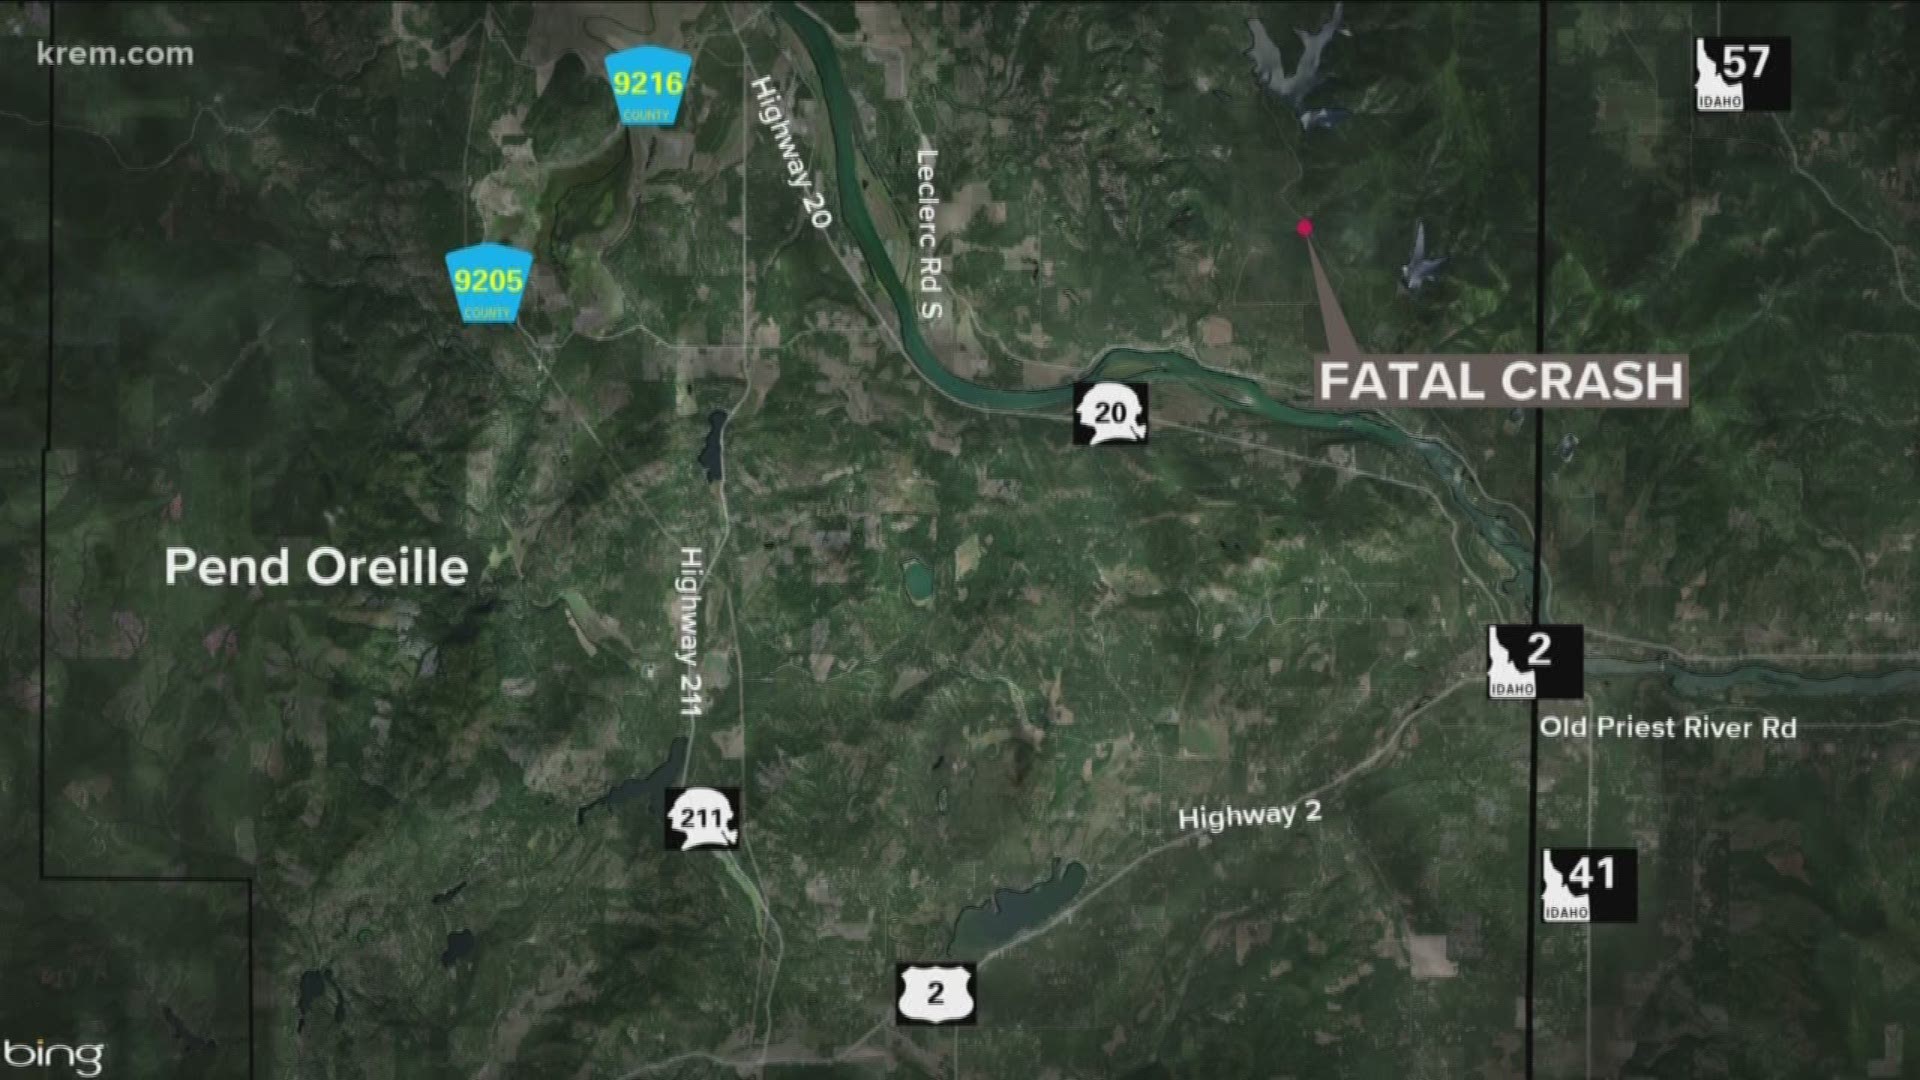 Authorities believe alcohol played a role in the fatal crash on Bead Lake Road.